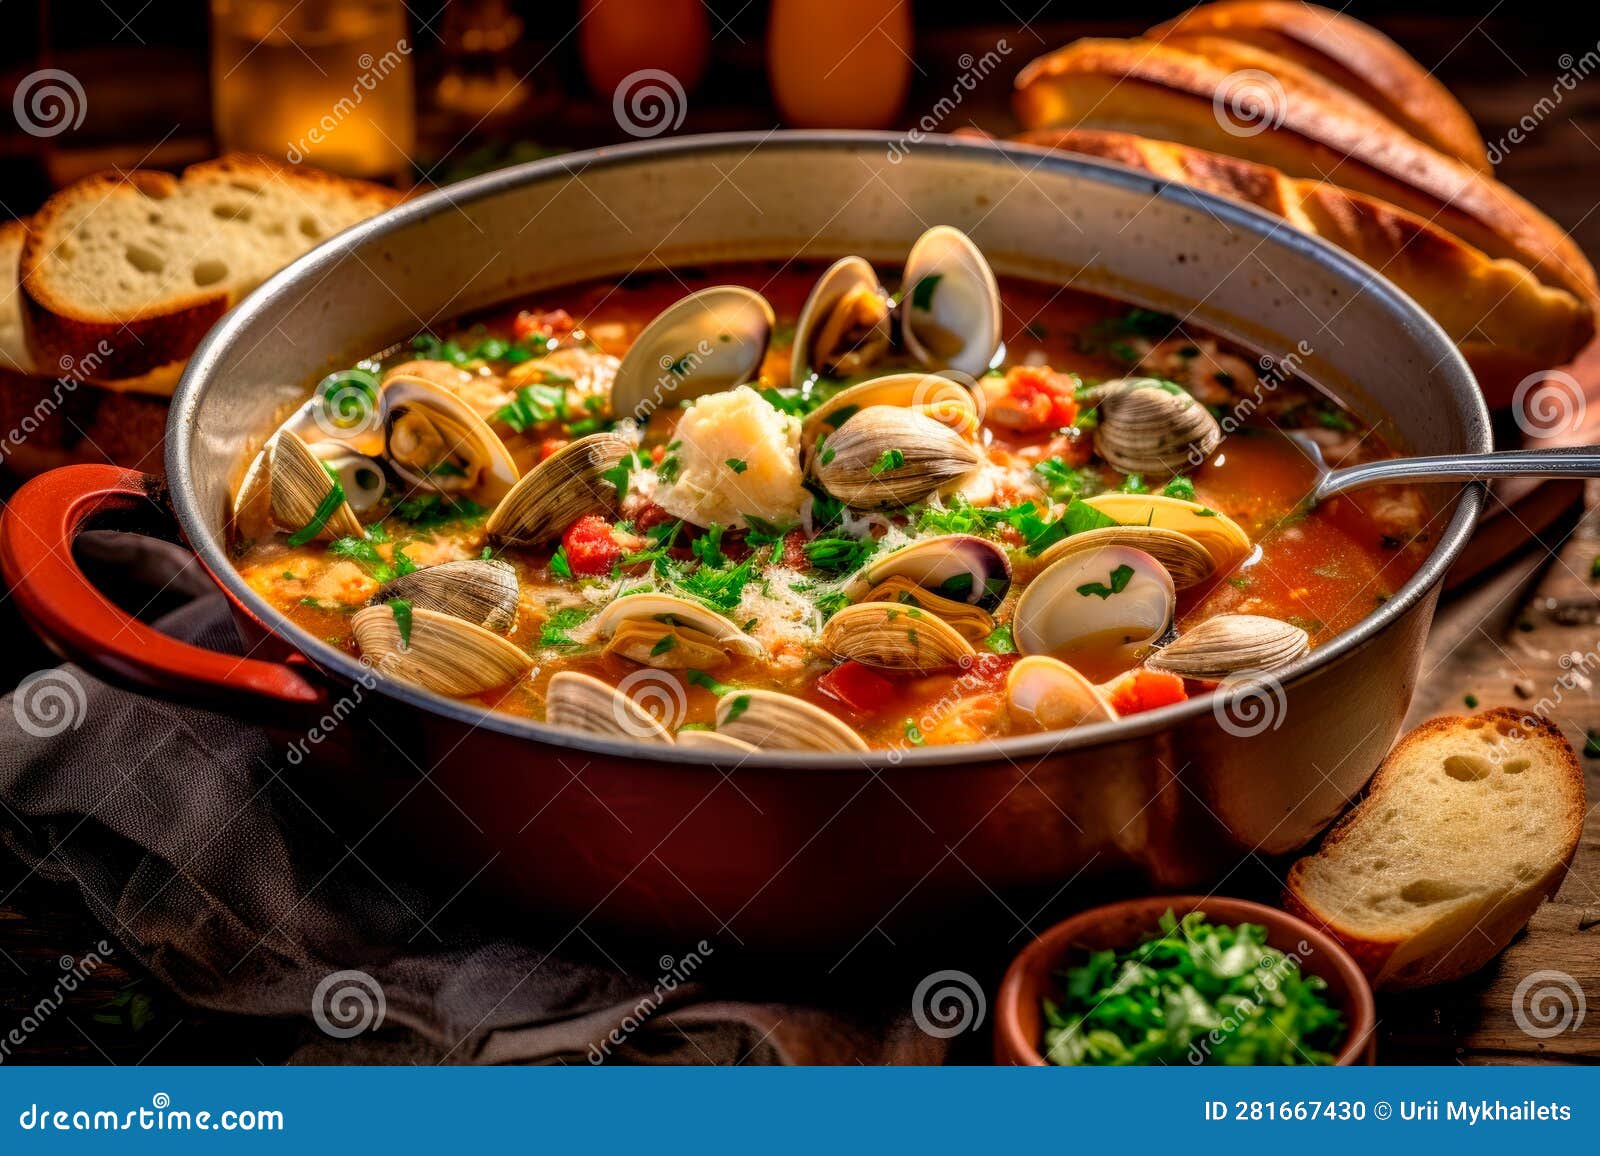 Clam Zuppa Recipe: Savory Seafood Delight